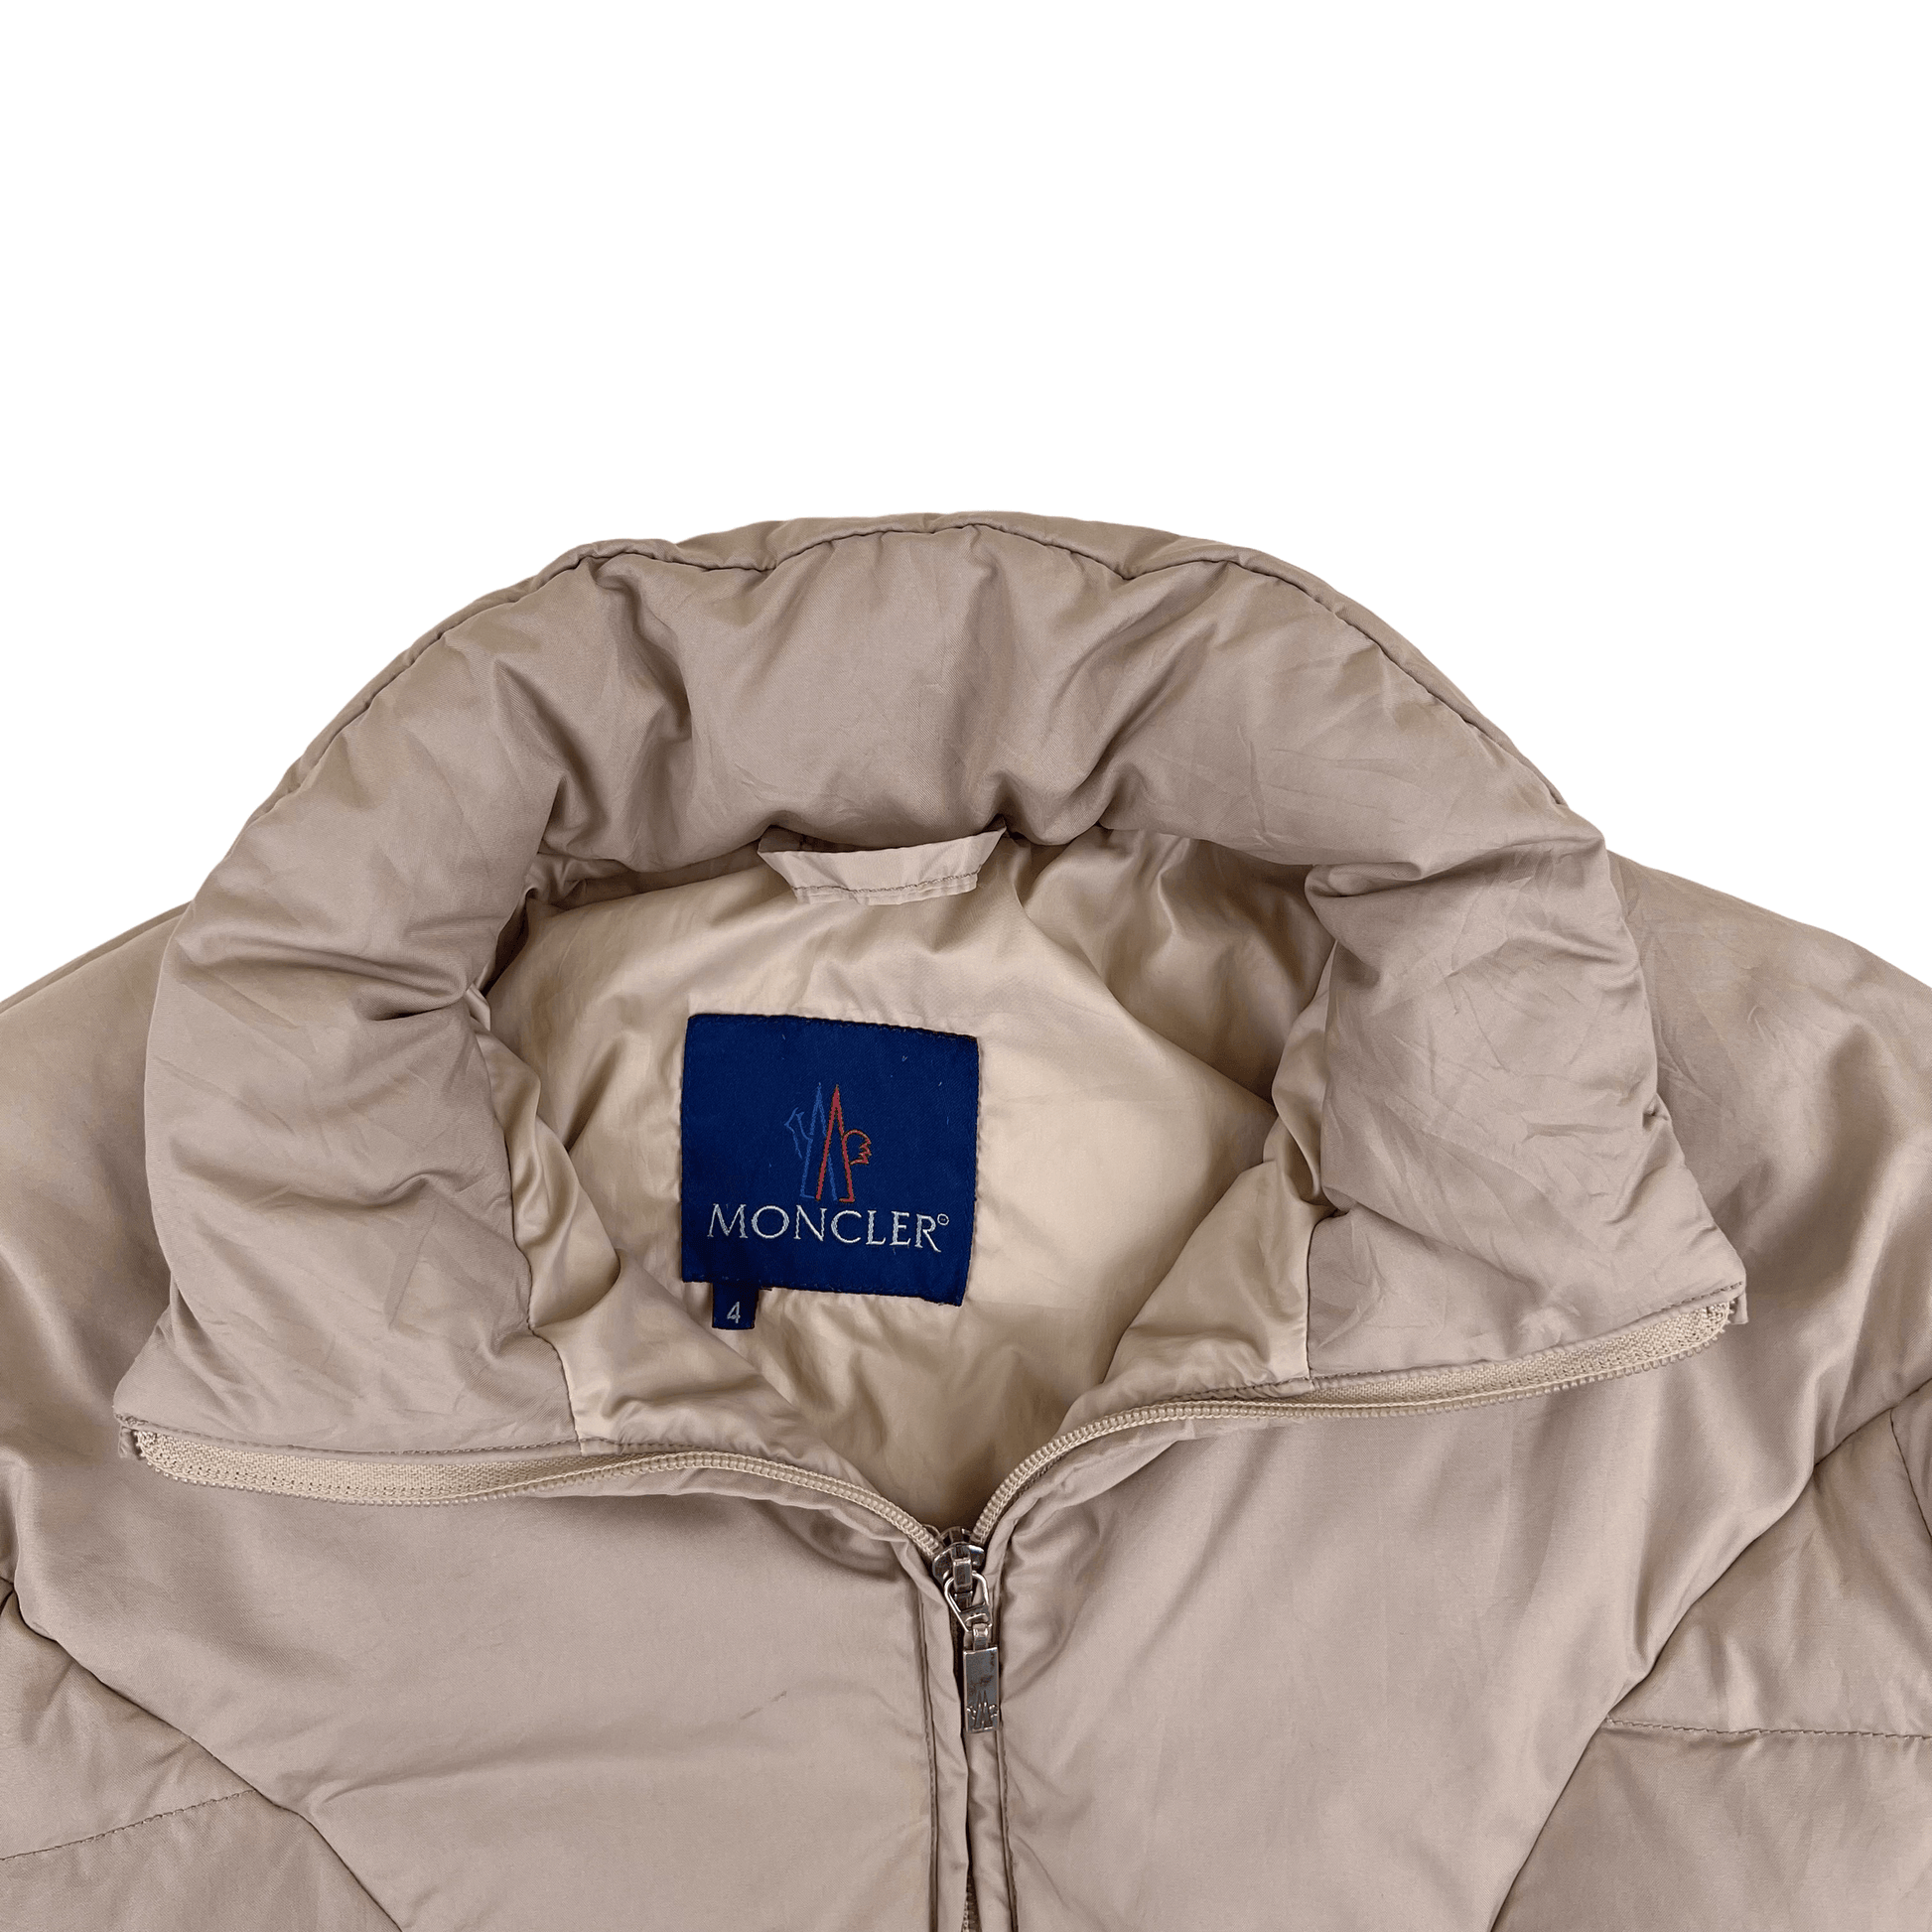 Moncler Puffer (S) - Known Source